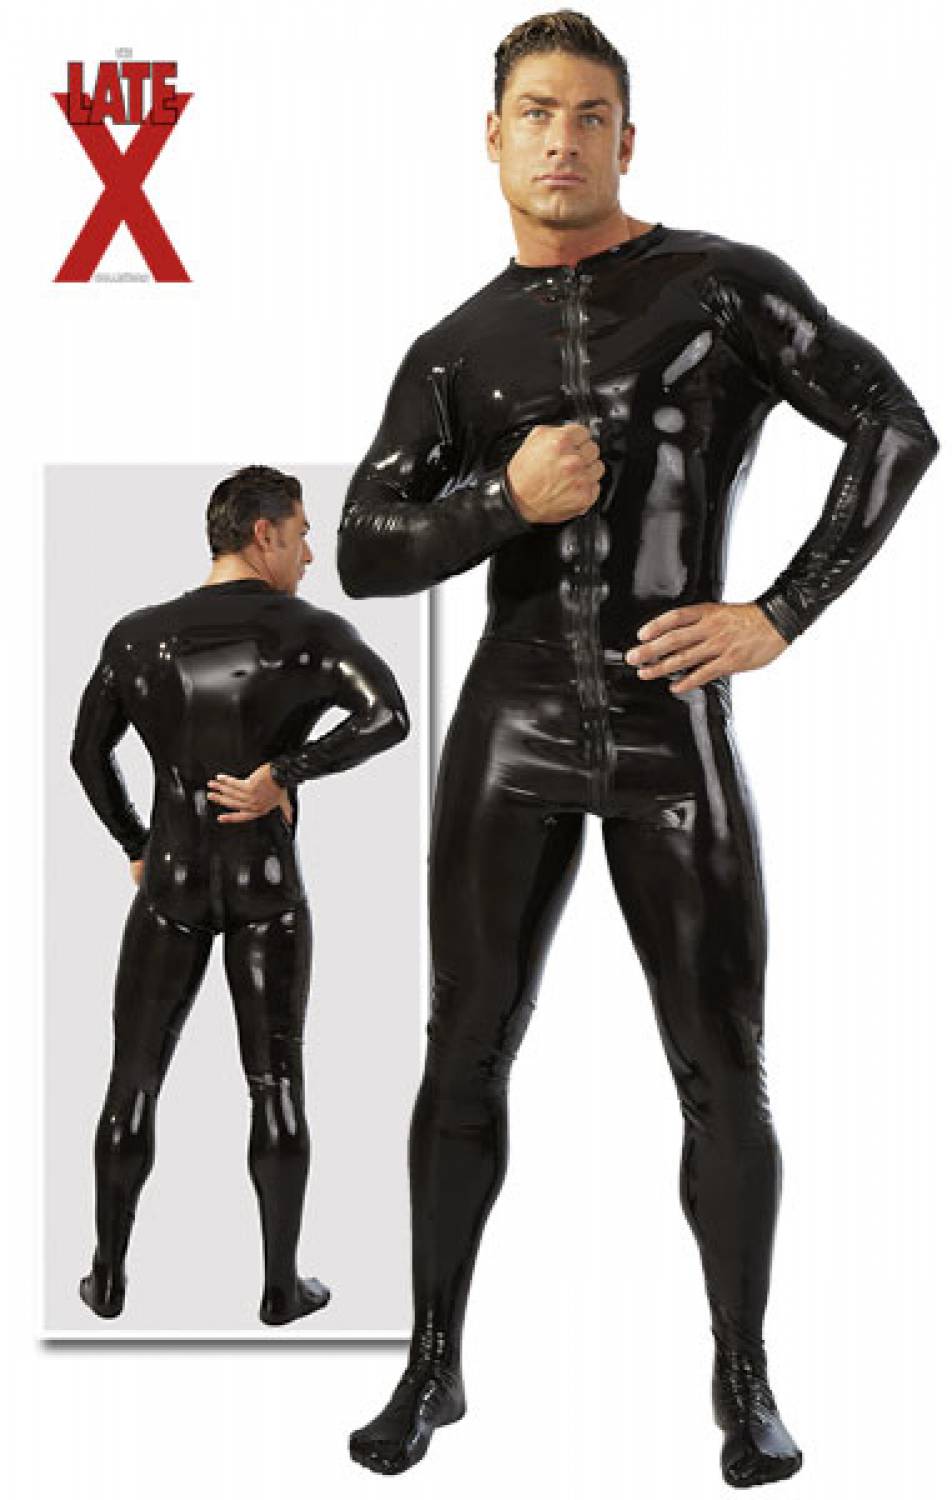 The Latex Collection Exciting men's latex suit